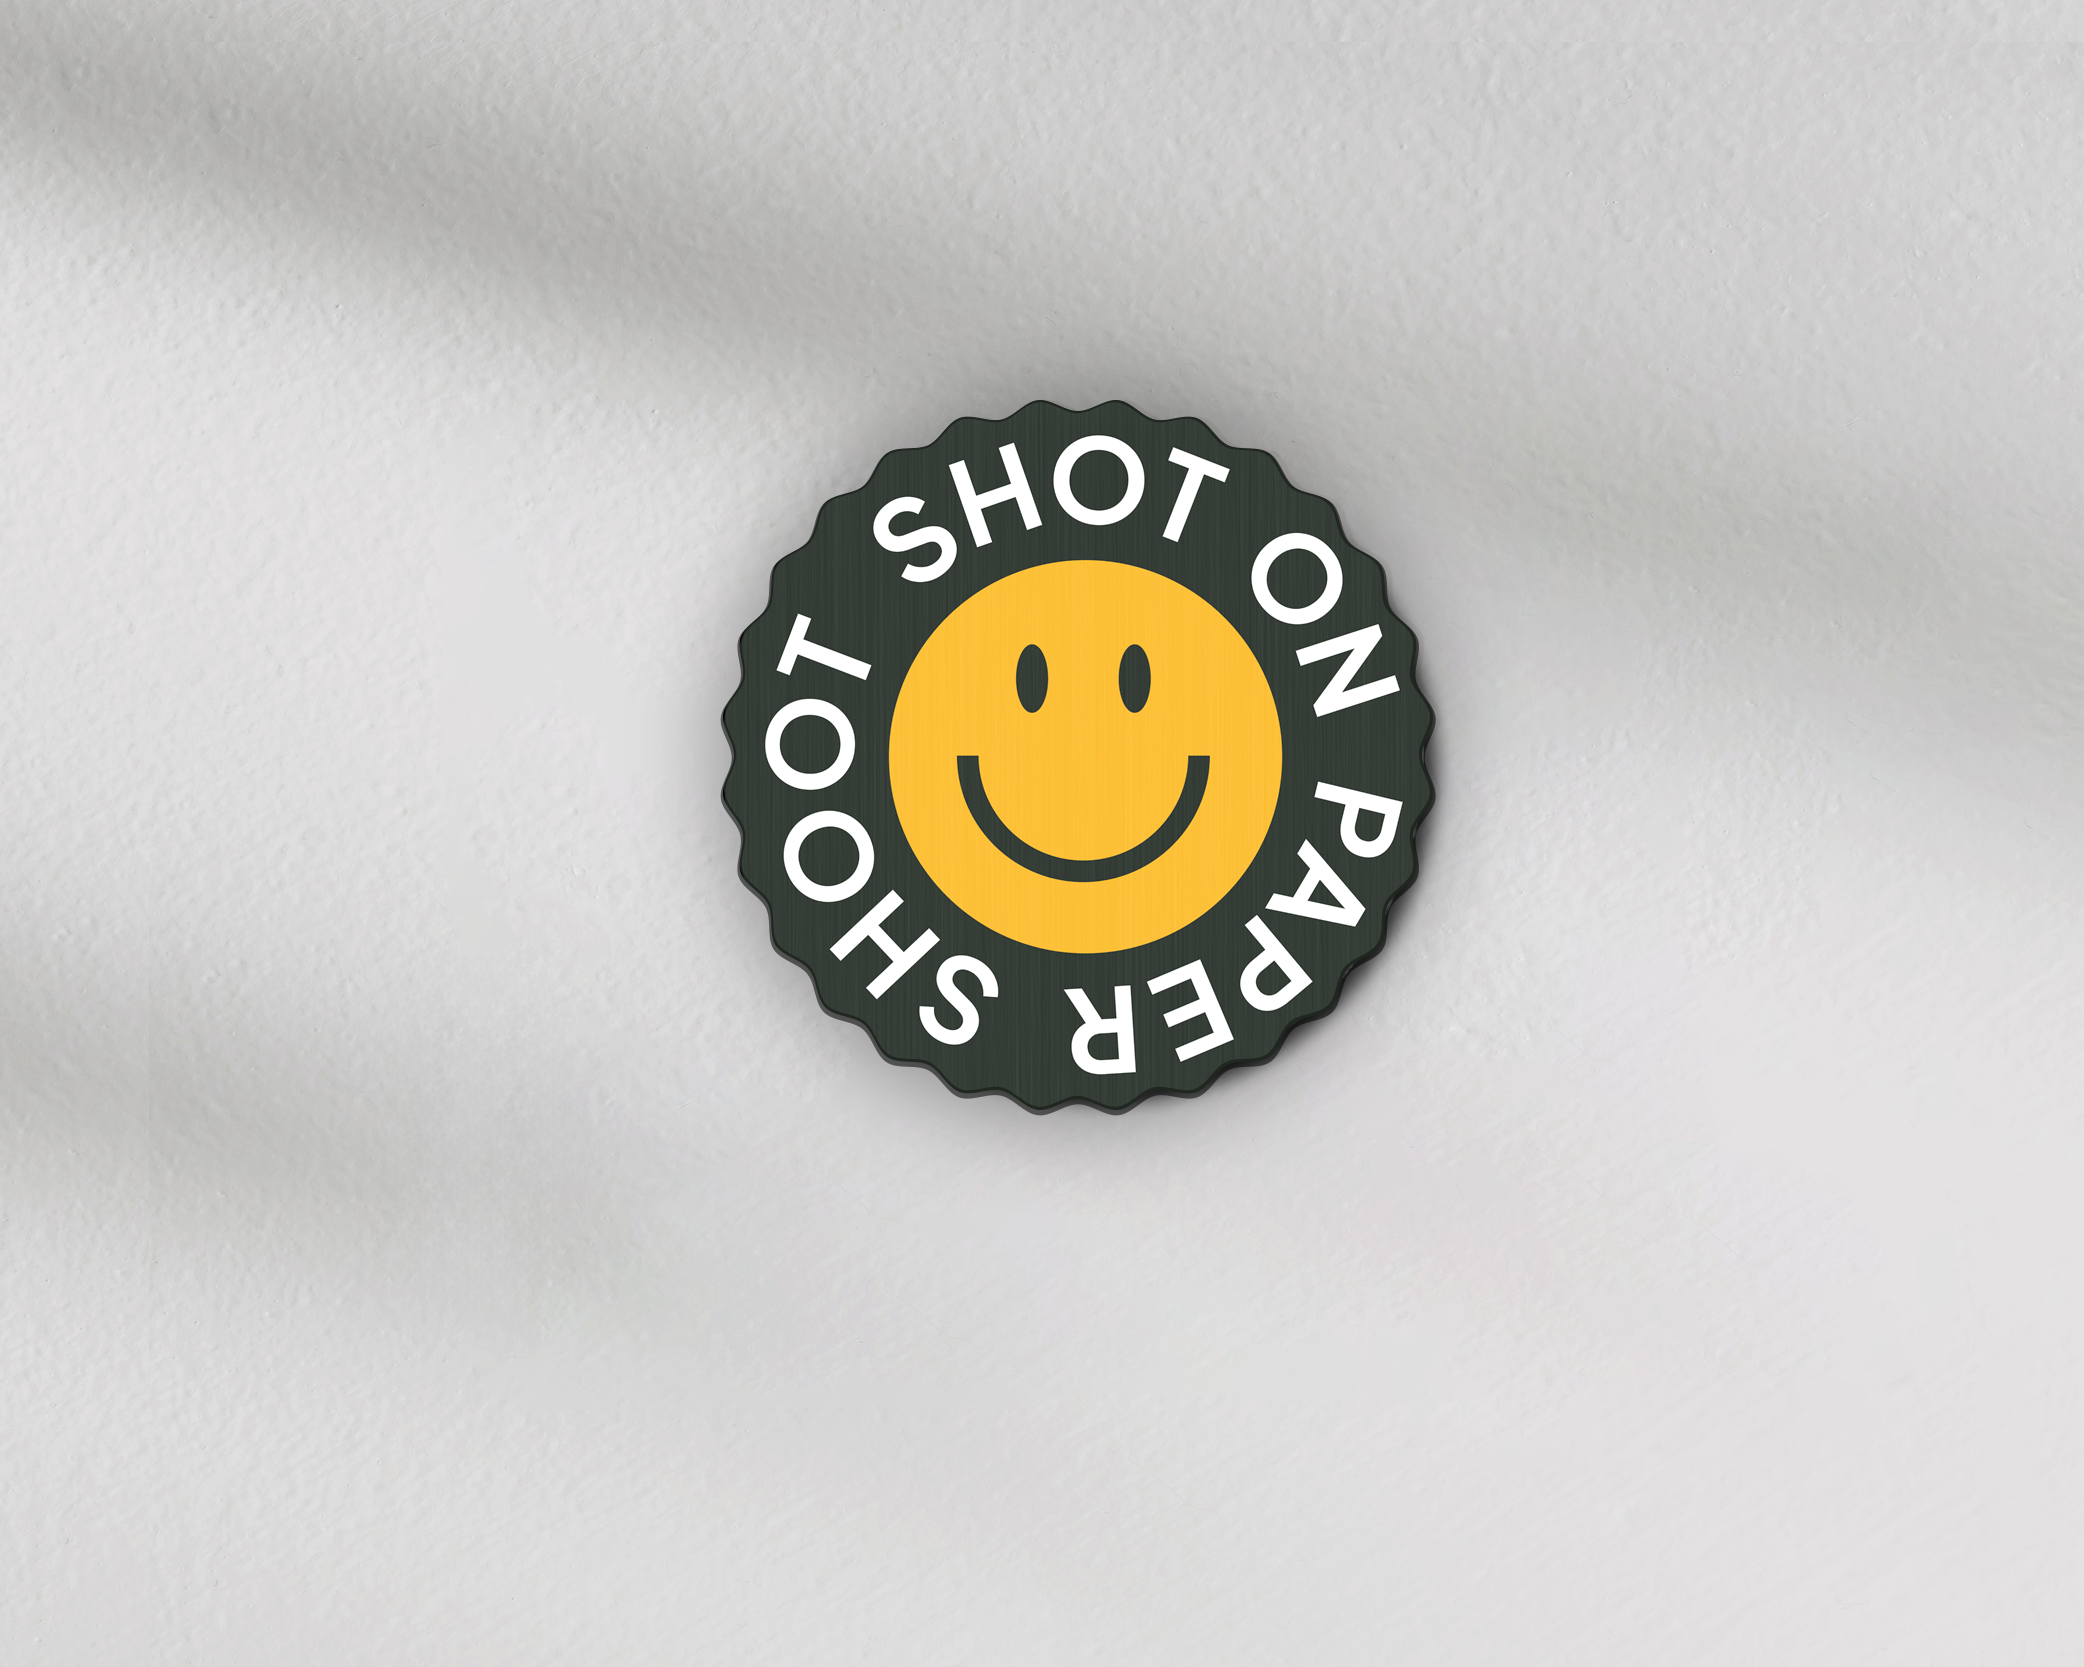 Shot on paper shoot text lens covers with yellow smiley face graphic with grip groves 